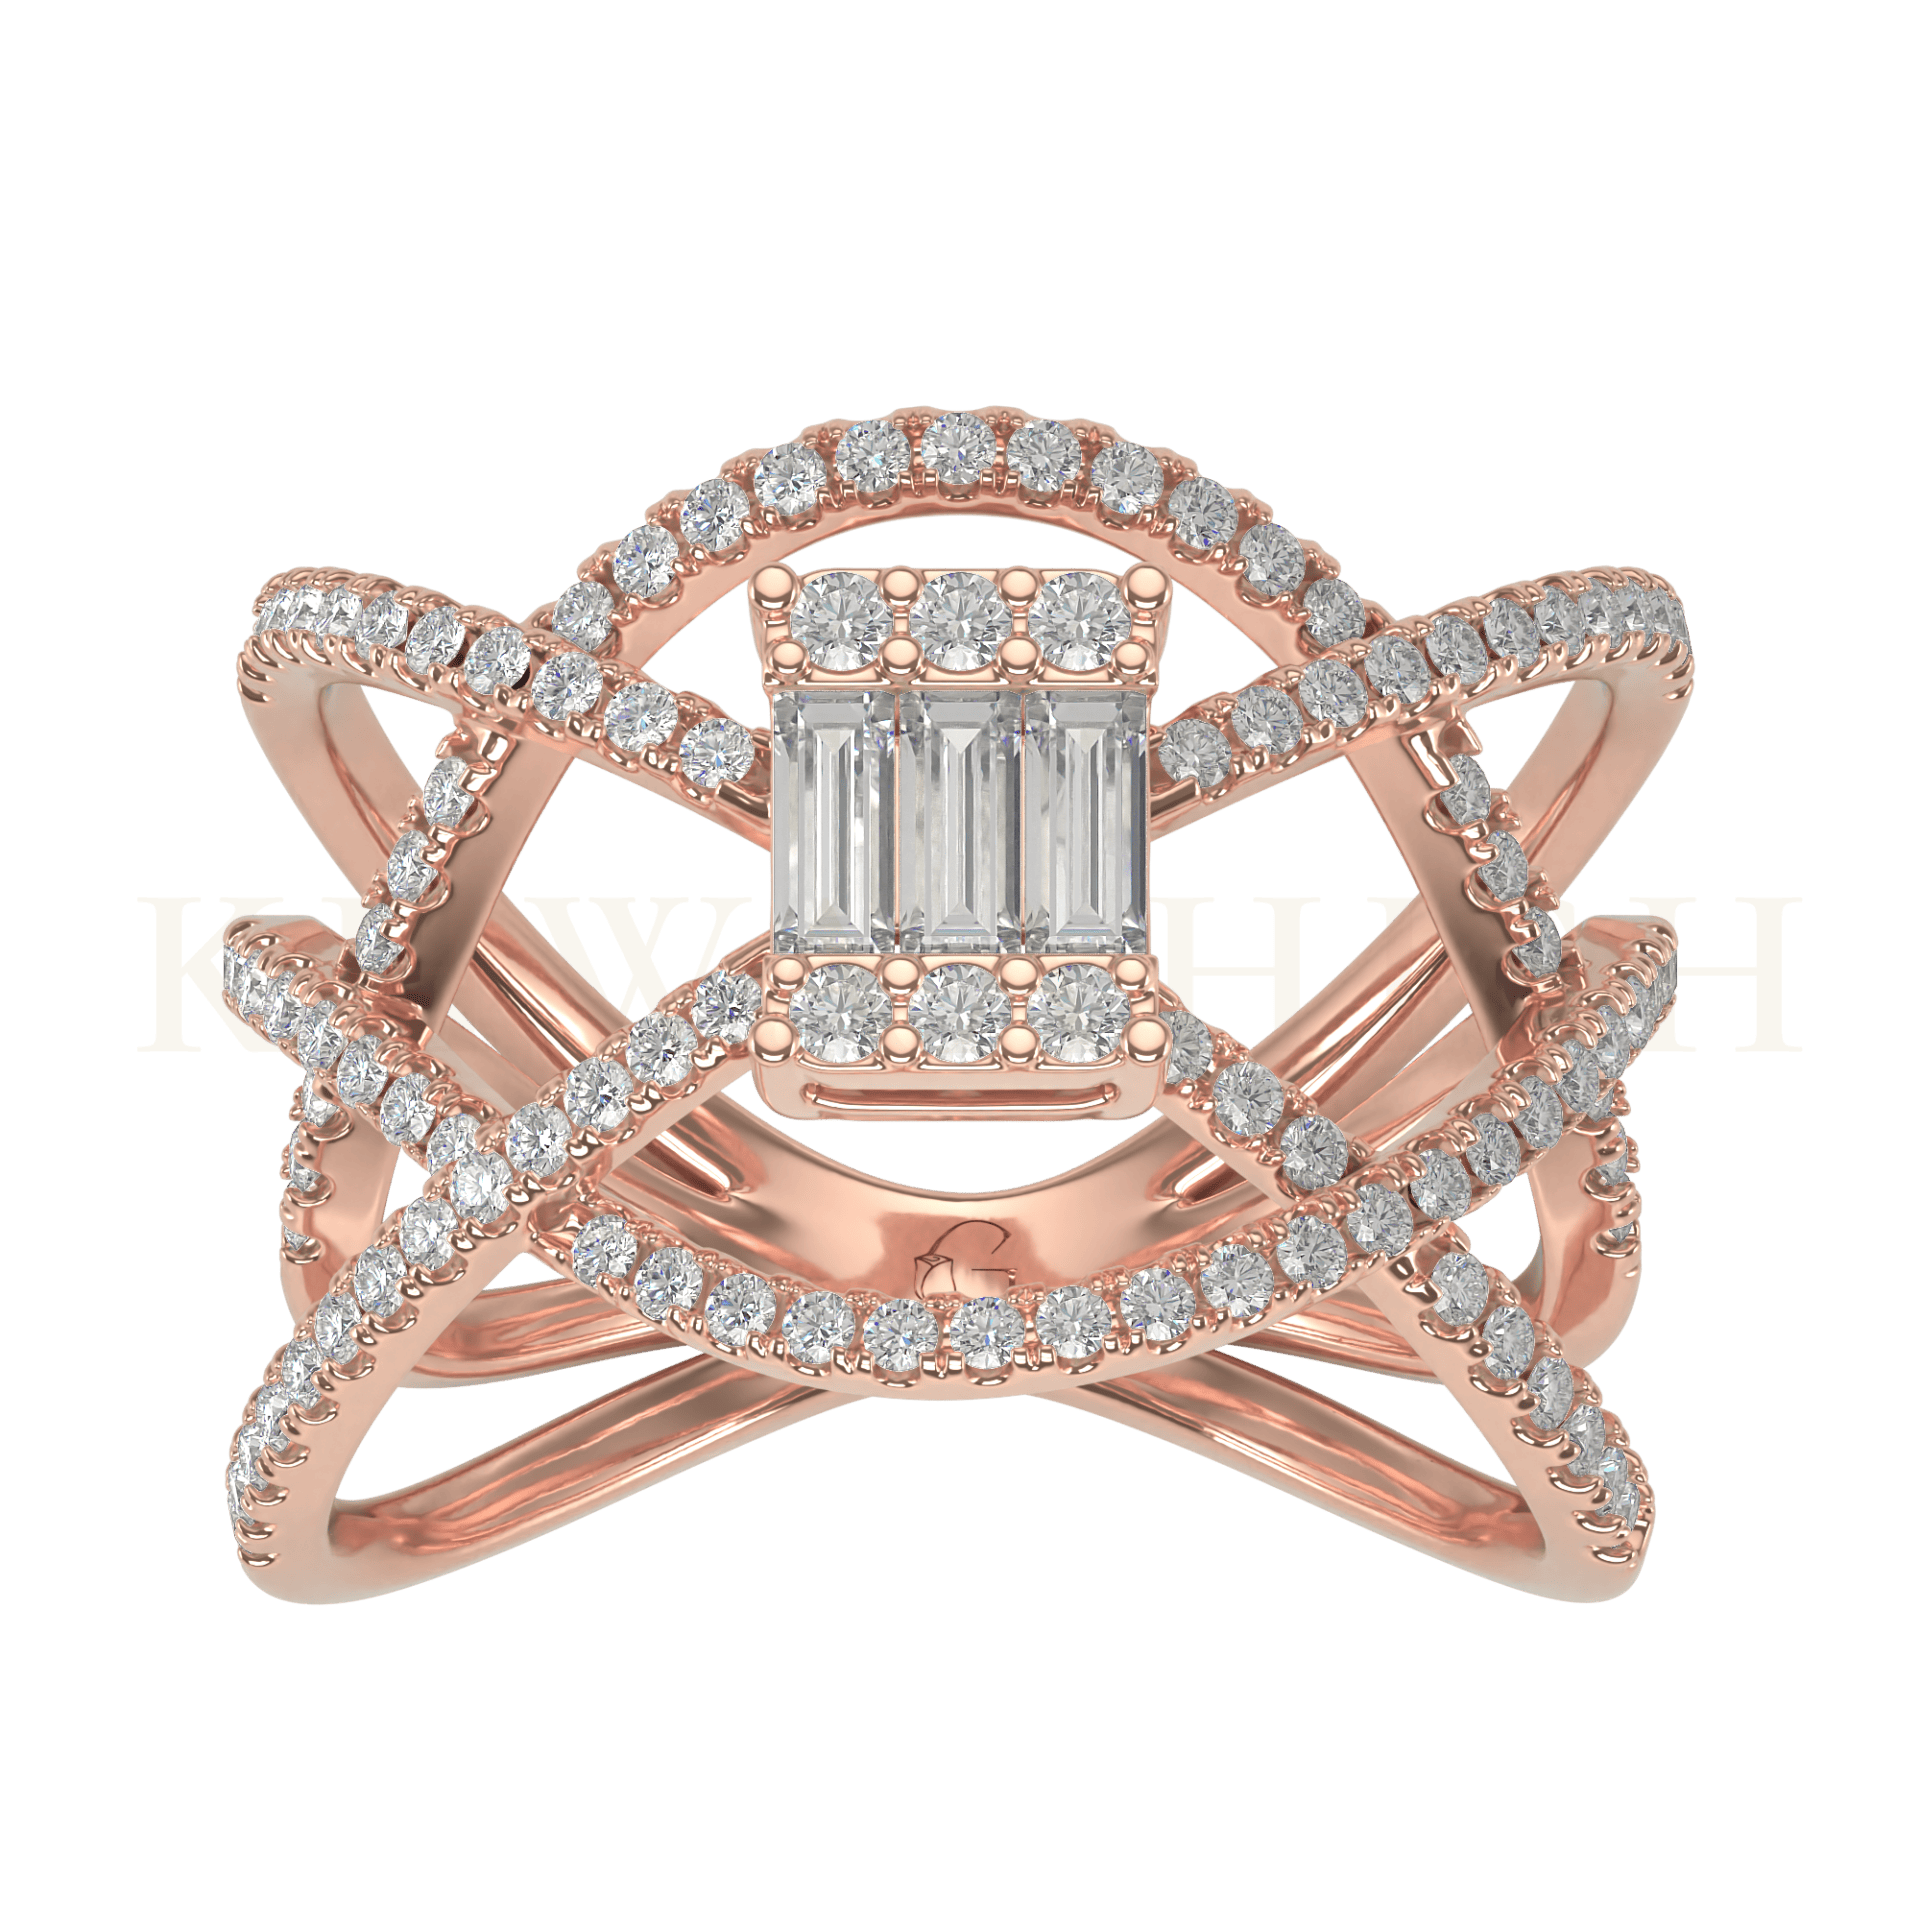 Top view of Criss Cross Beauty Diamond Band Ring  in rose gold.